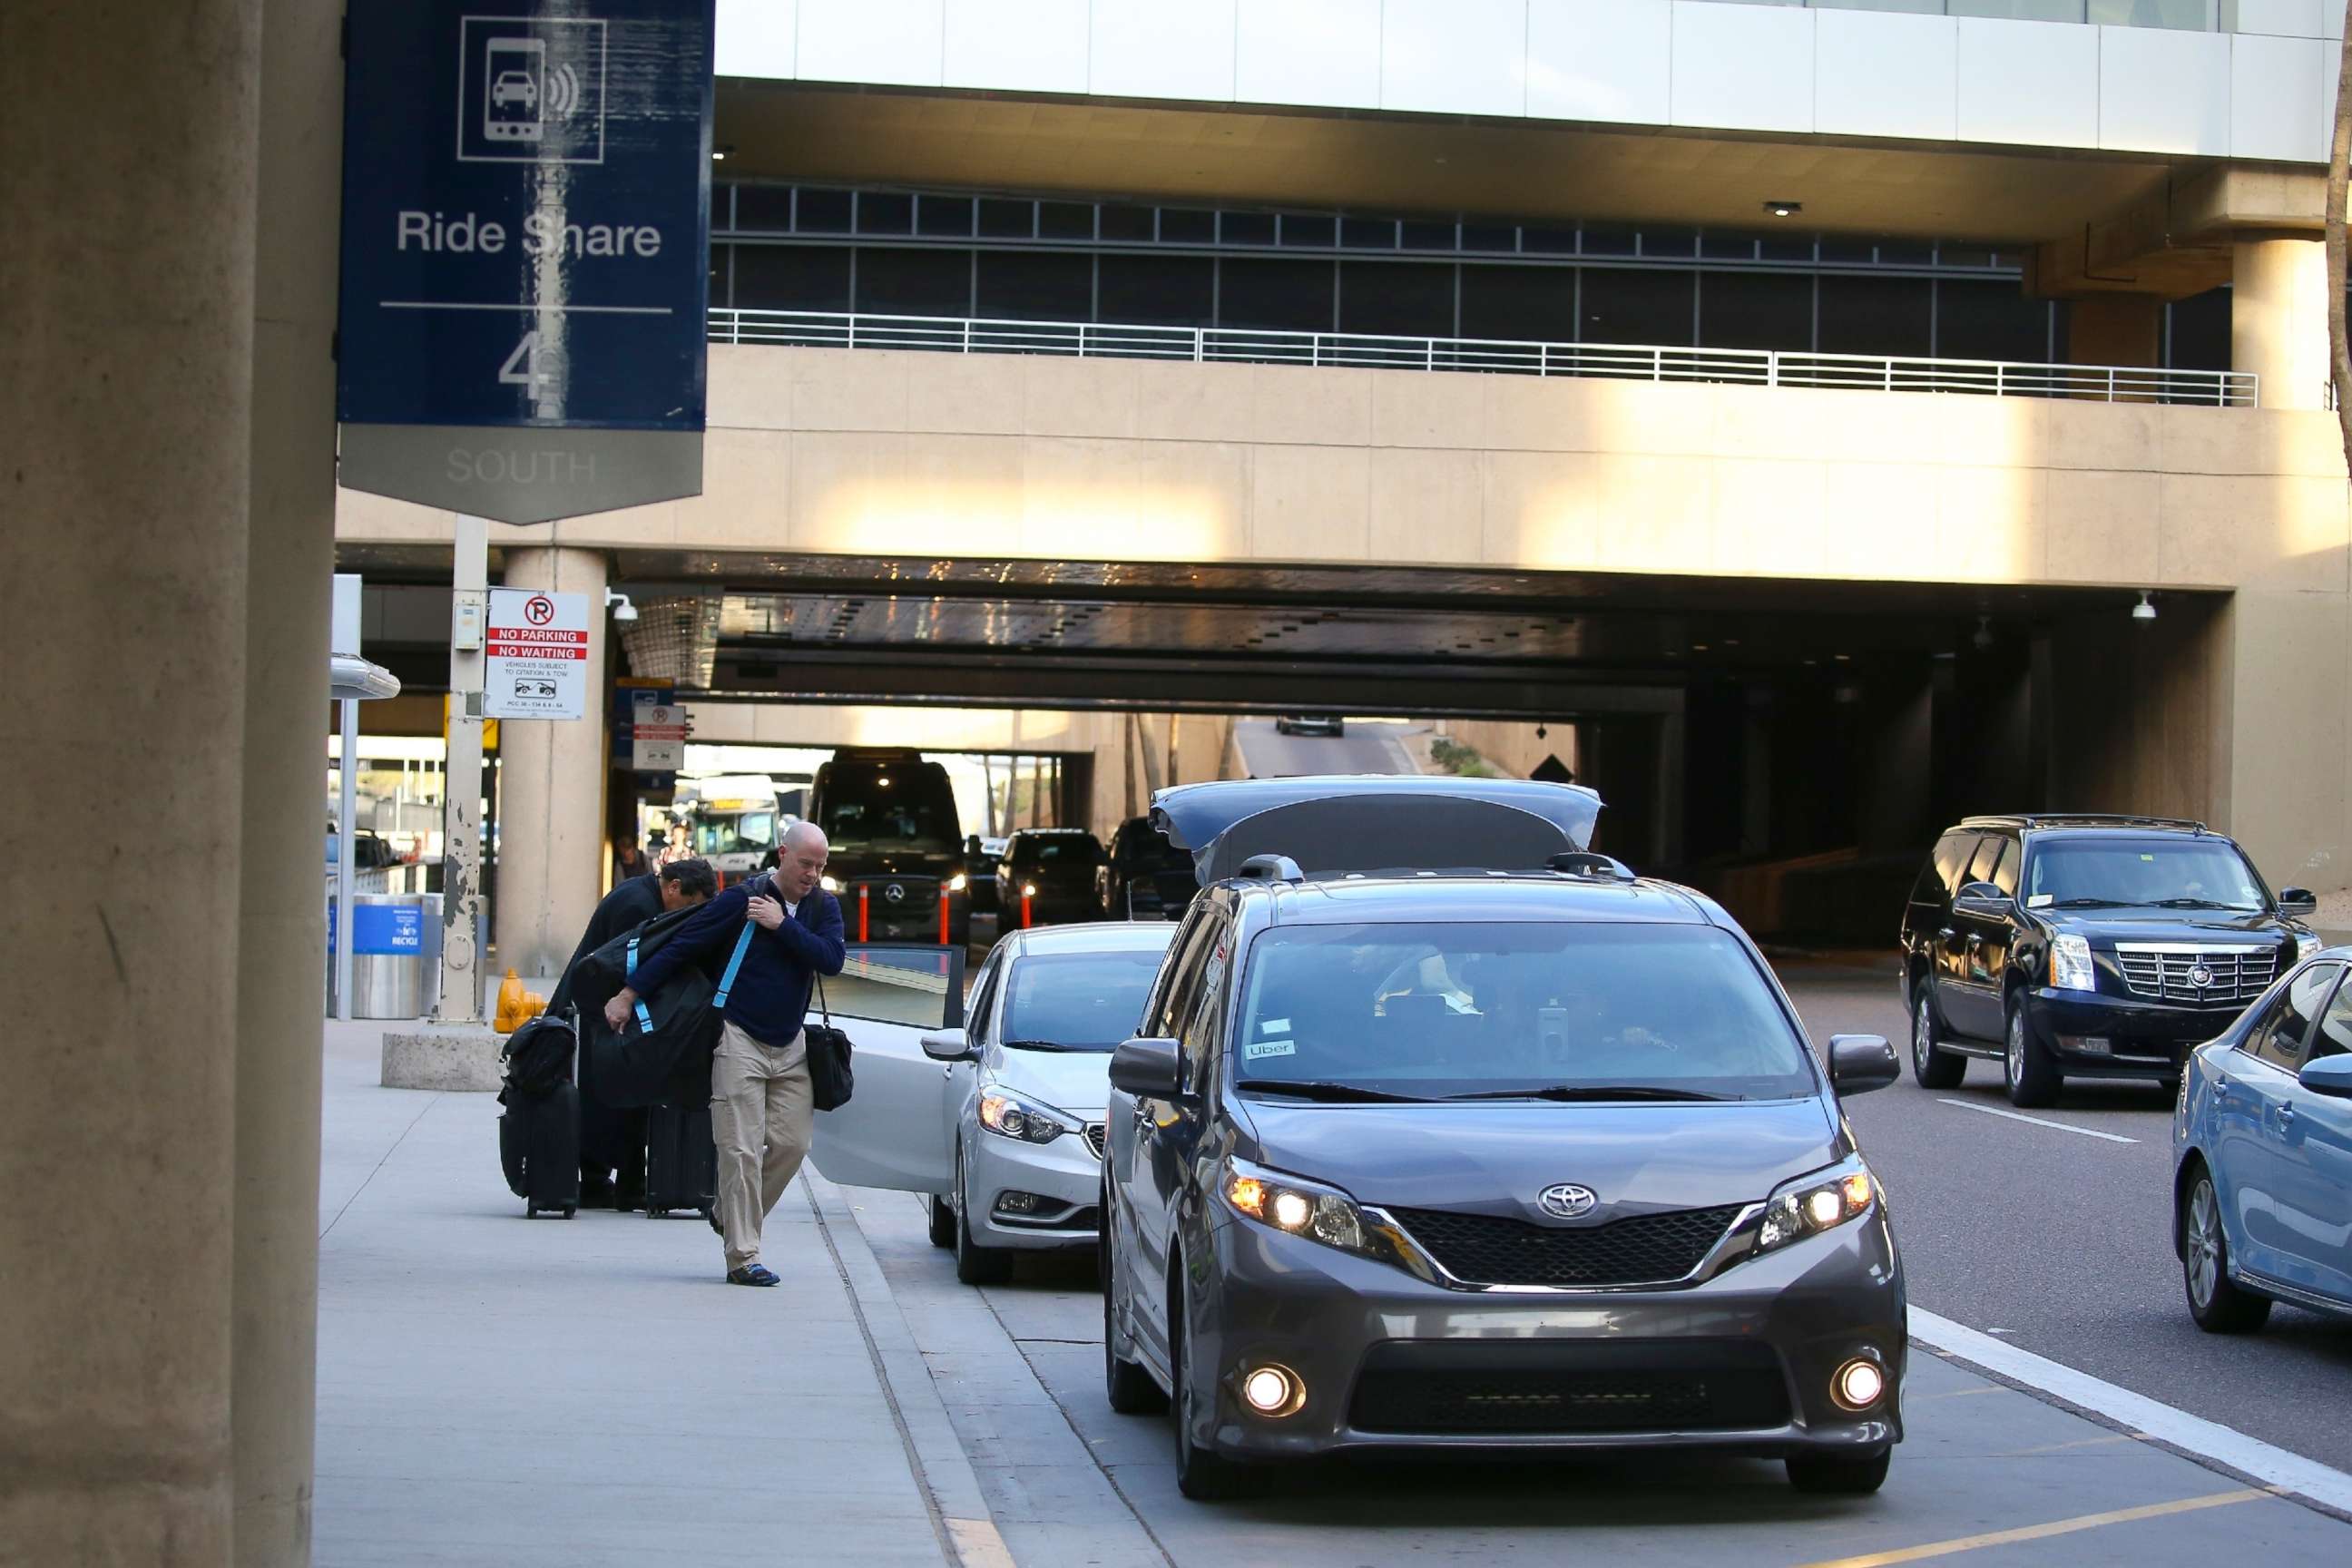 PHOTO: Passengers find their rides at the Ride Share point as they exit Phoenix Sky Harbor International Airport in Phoenix, Dec. 17, 2019.